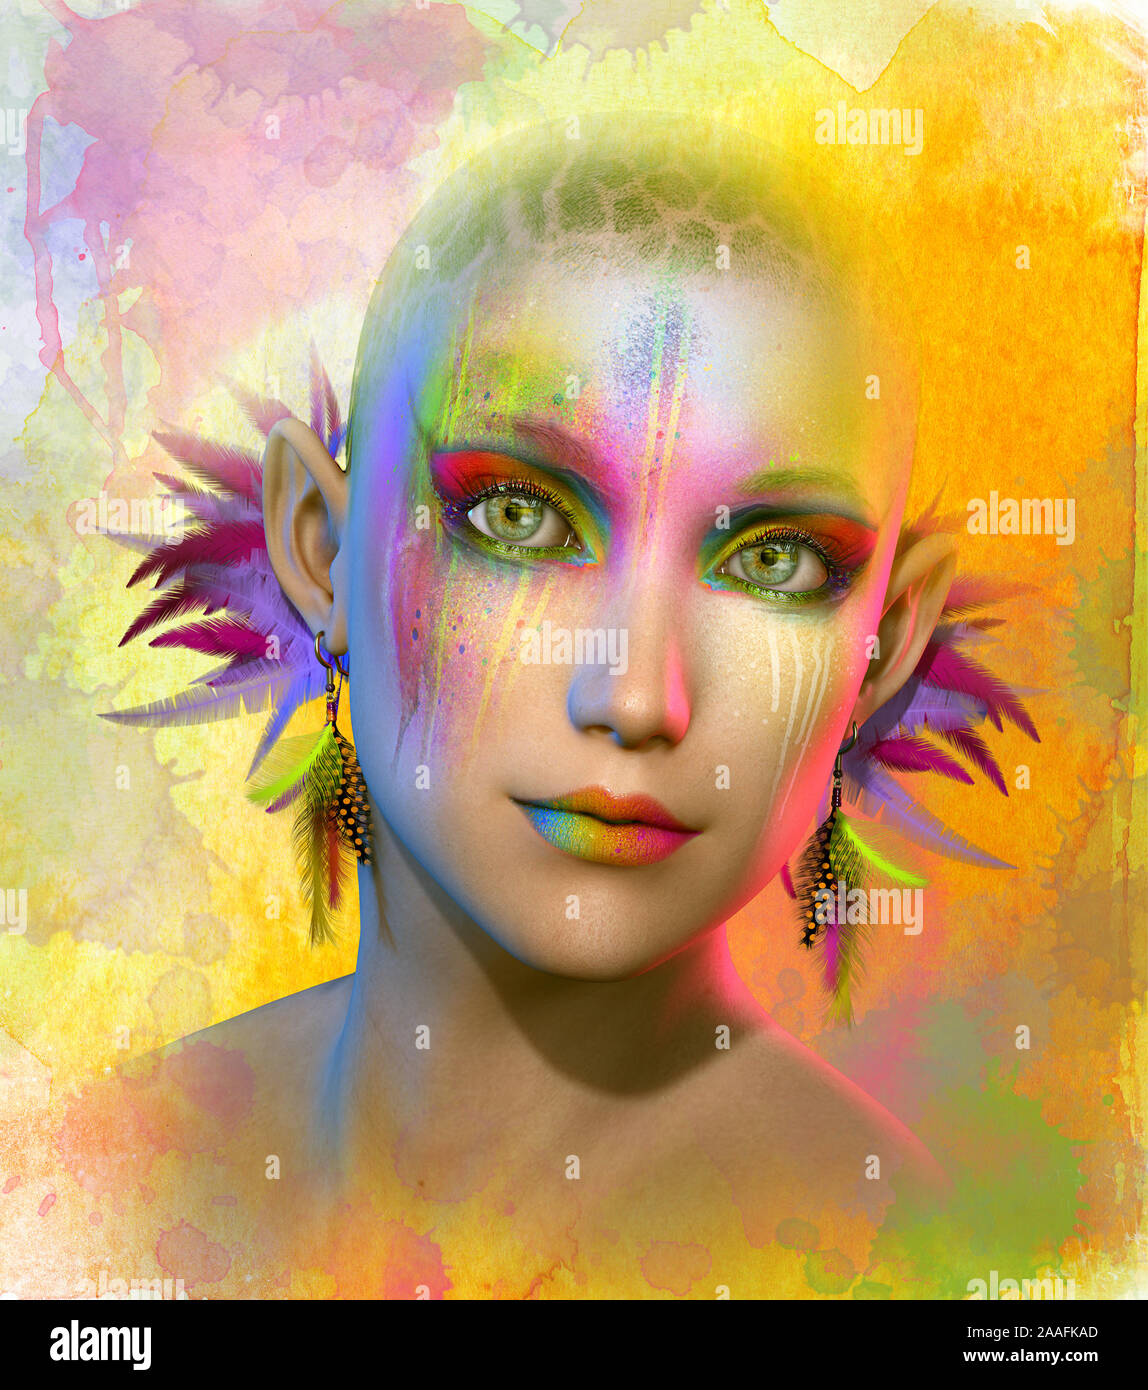 3d computer graphics of a portrait of a woman with colorful makeup and feather earrings Stock Photo